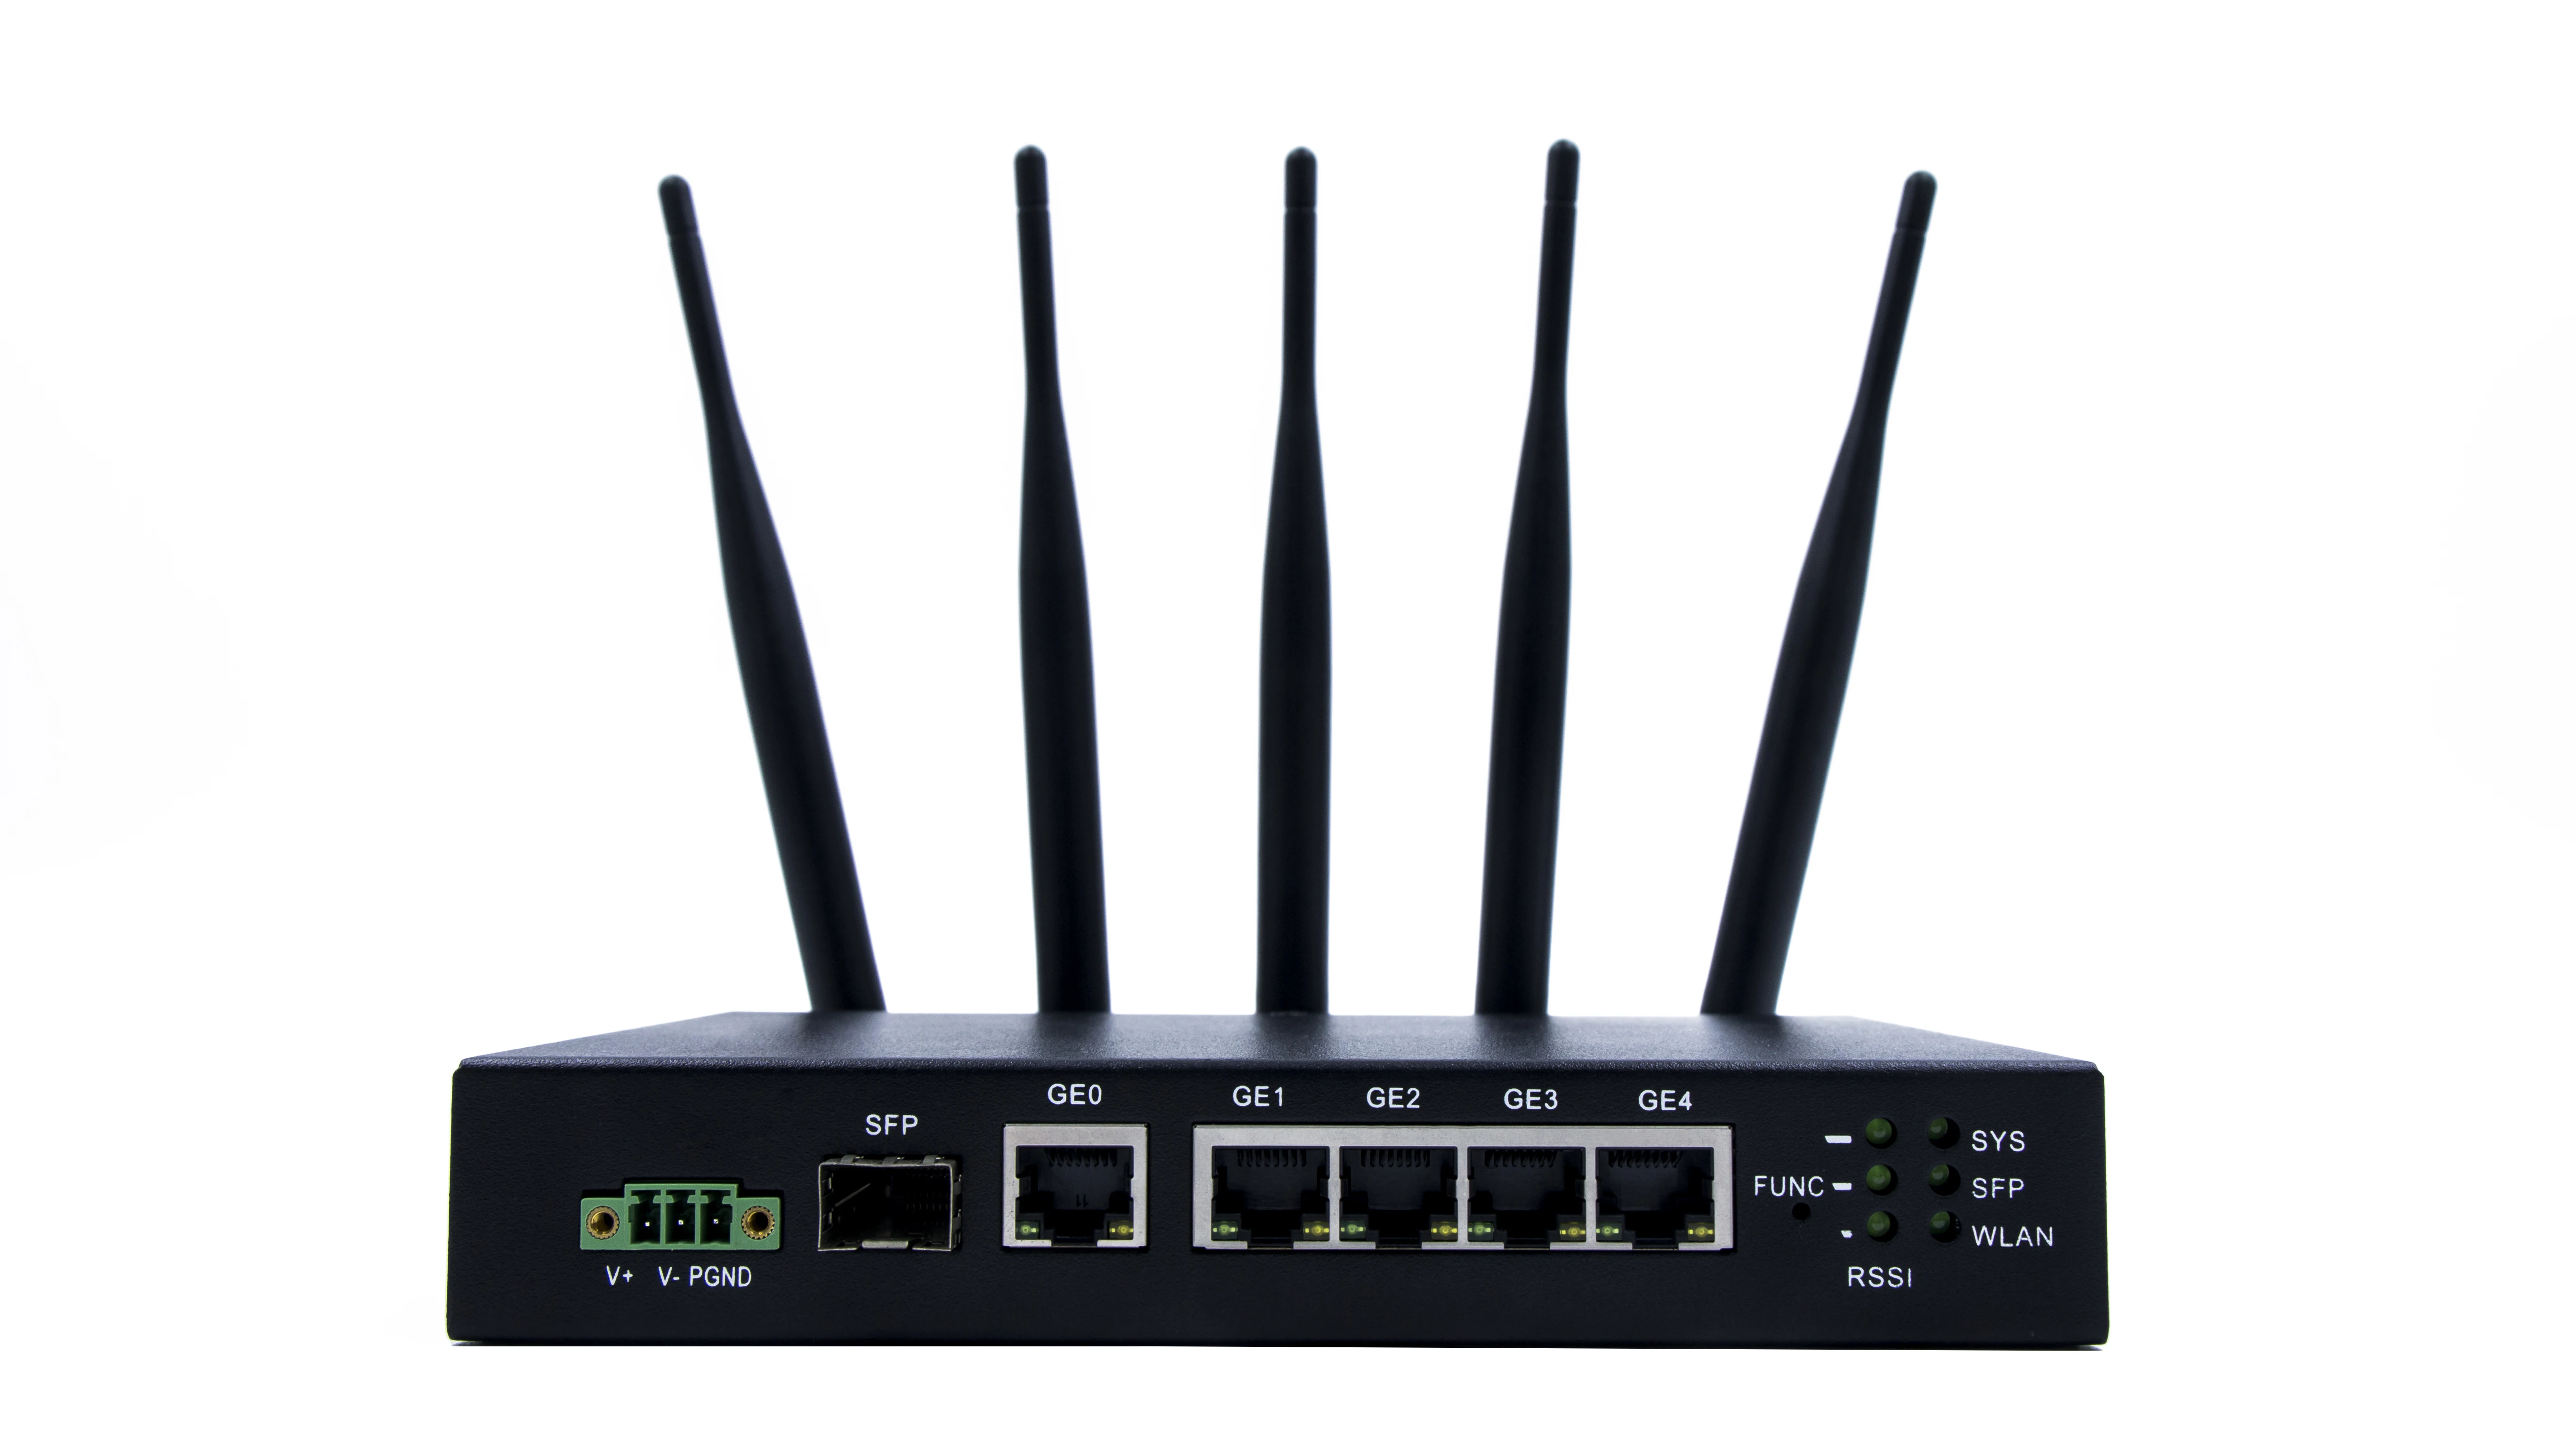 6g WIFI Router. Wi-Fi Router RX-23302. 45 LTE Wi Fi Rotor narxi. 4g vpn